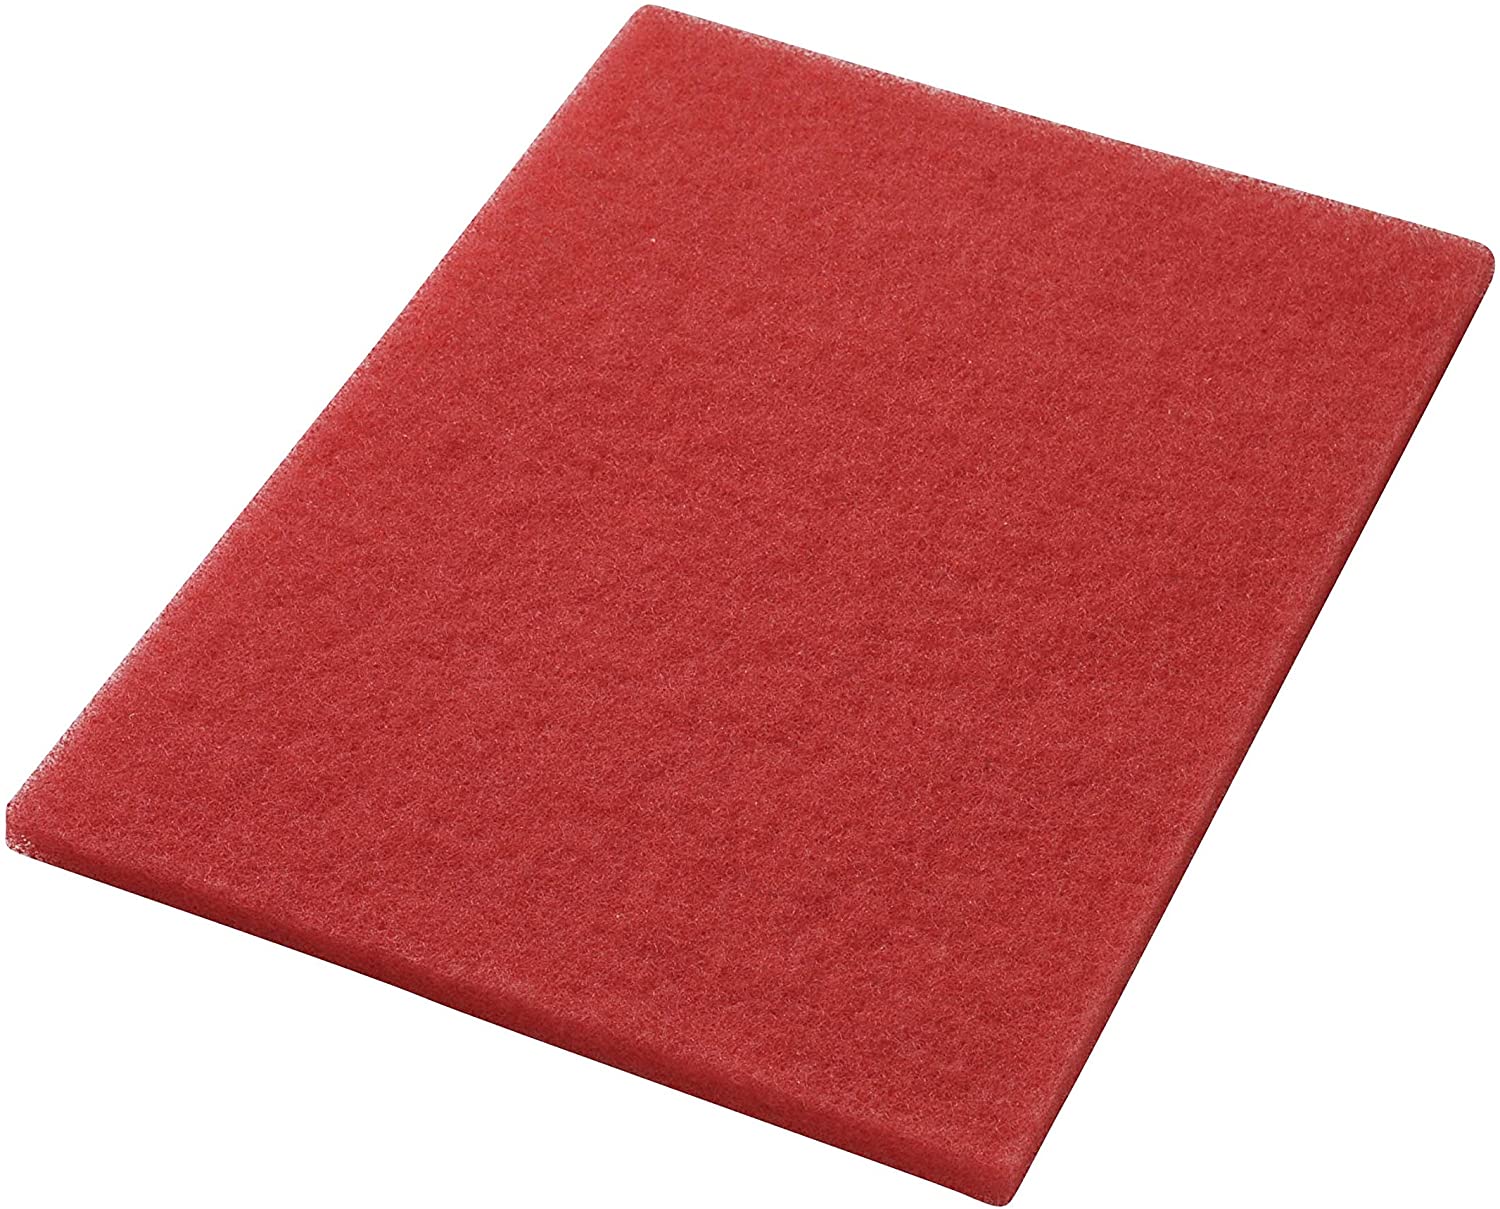 Americo Manufacturing 40441420 Red Buffing Floor Pad Rectangle (5 Pack), 14" x 20"